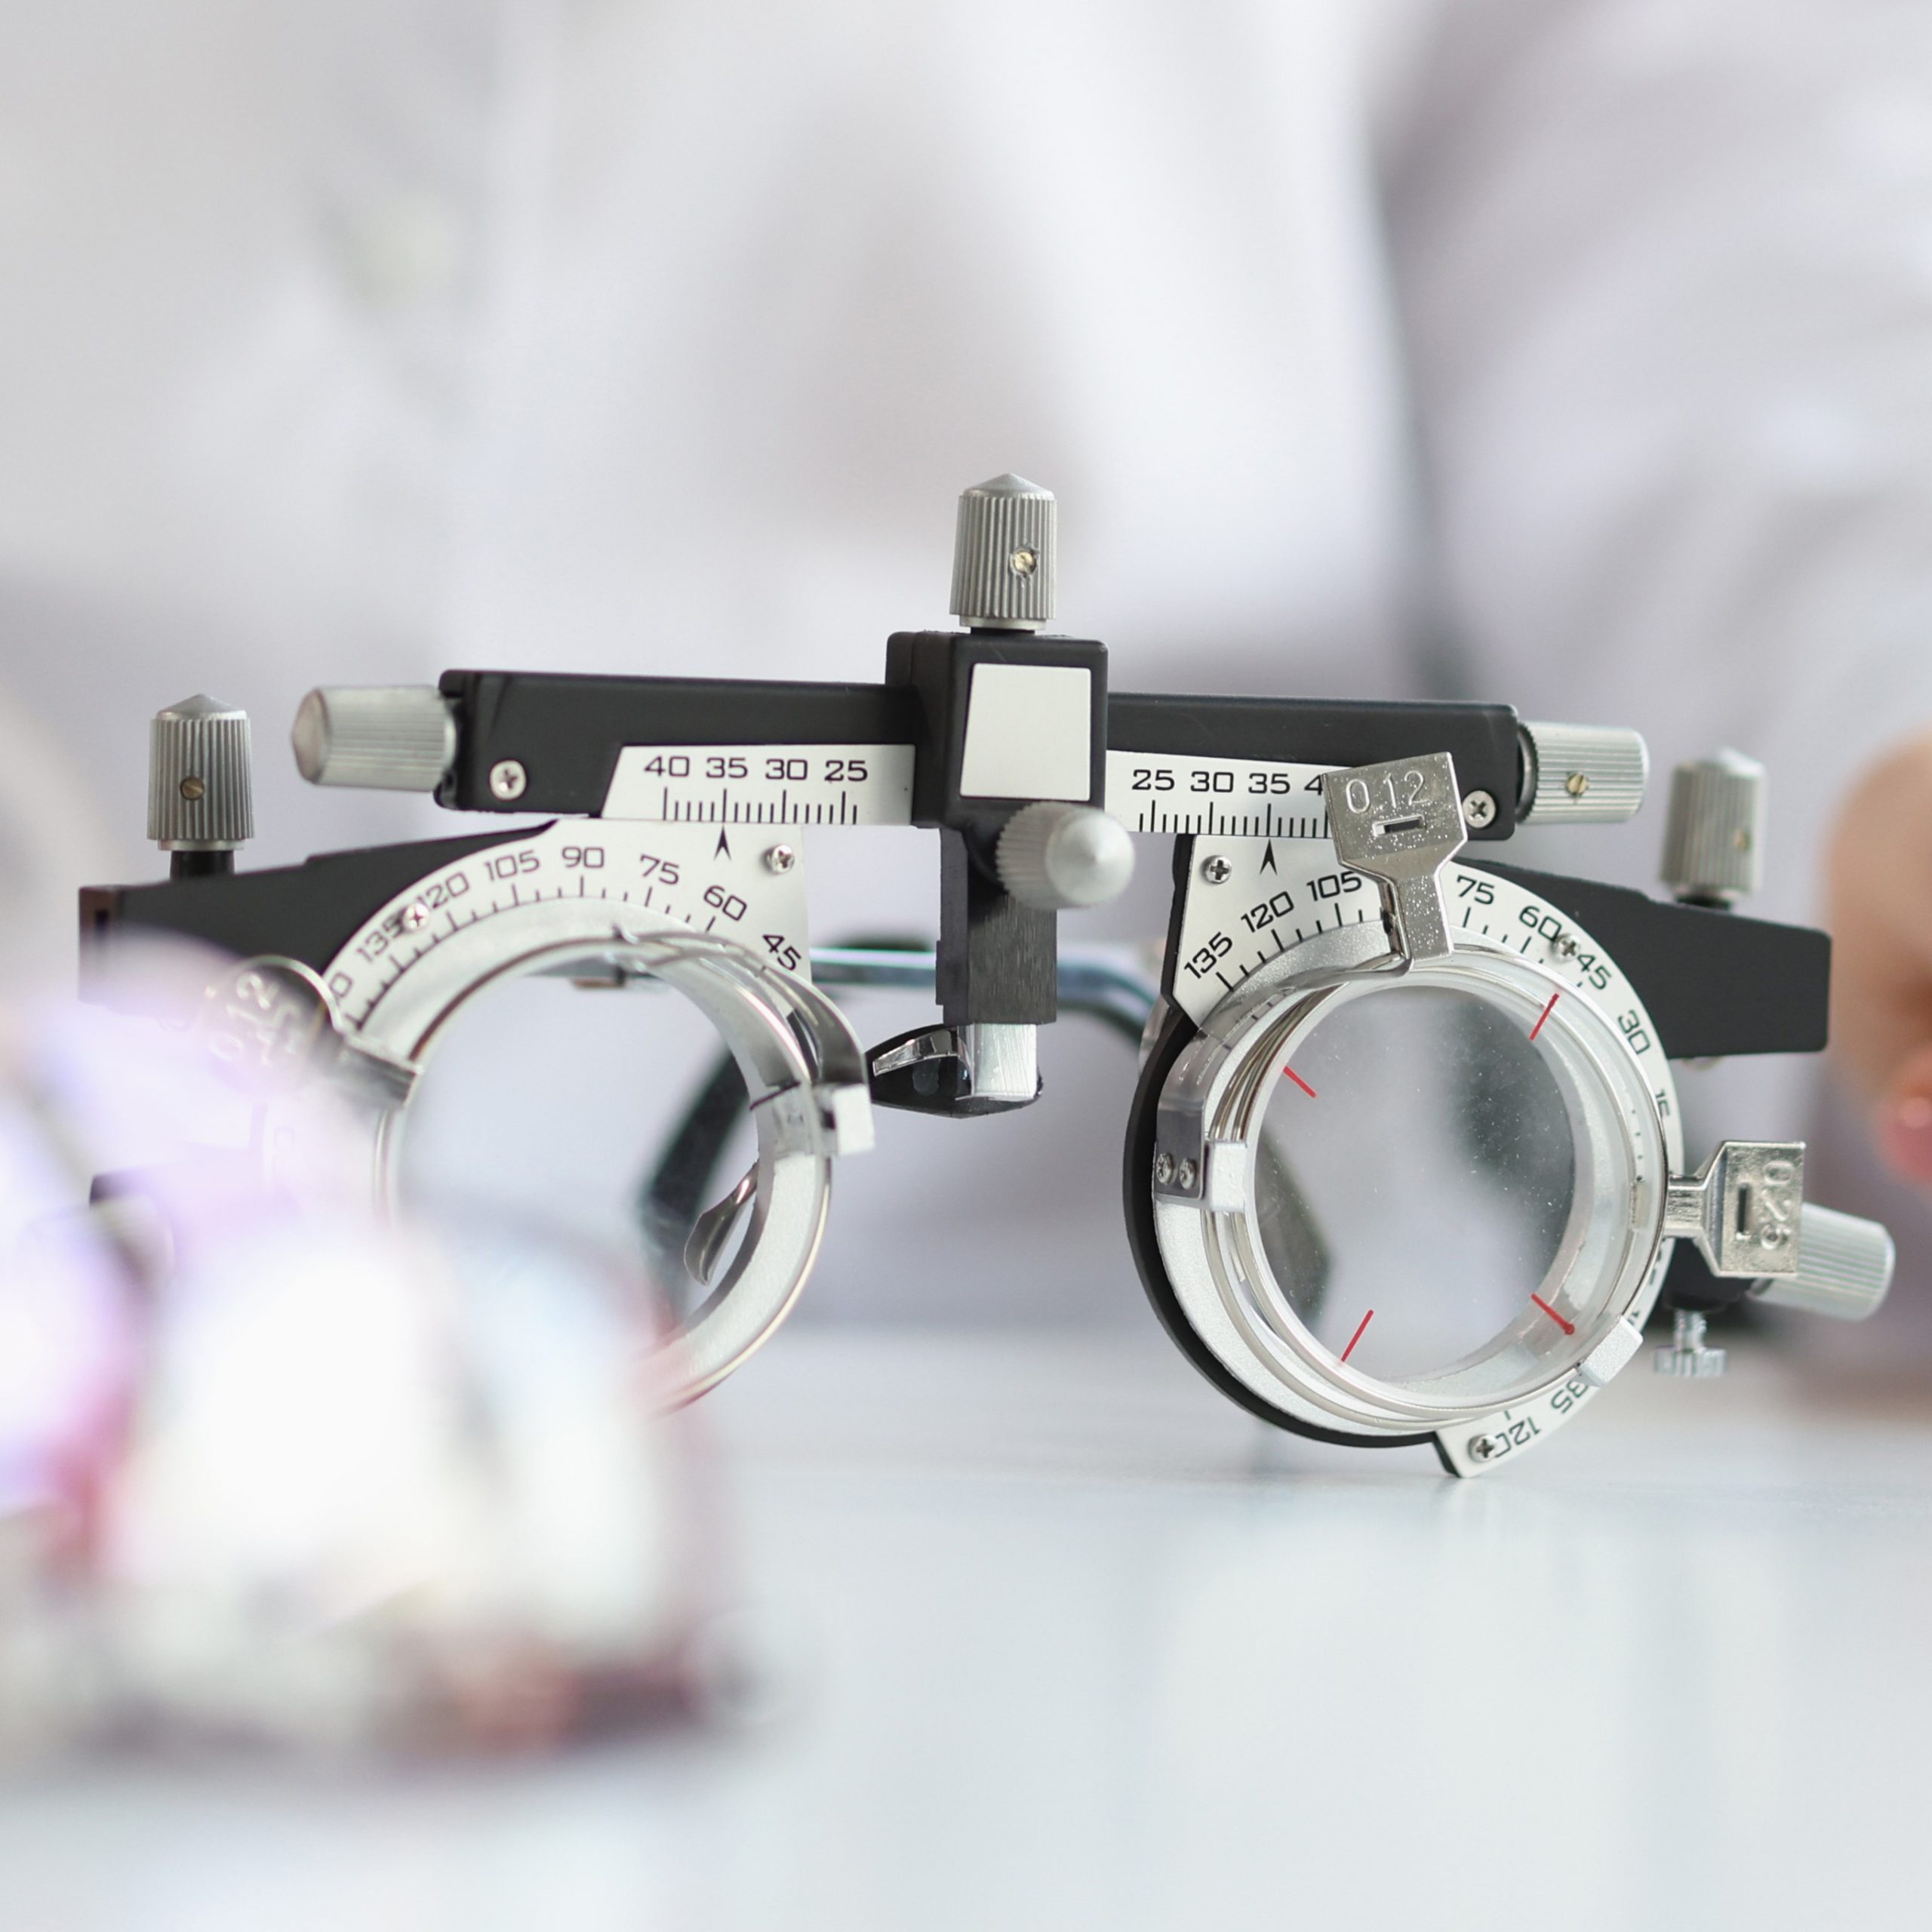 Glasses for checking vision lying on table near doctor ophthalmologist closeup